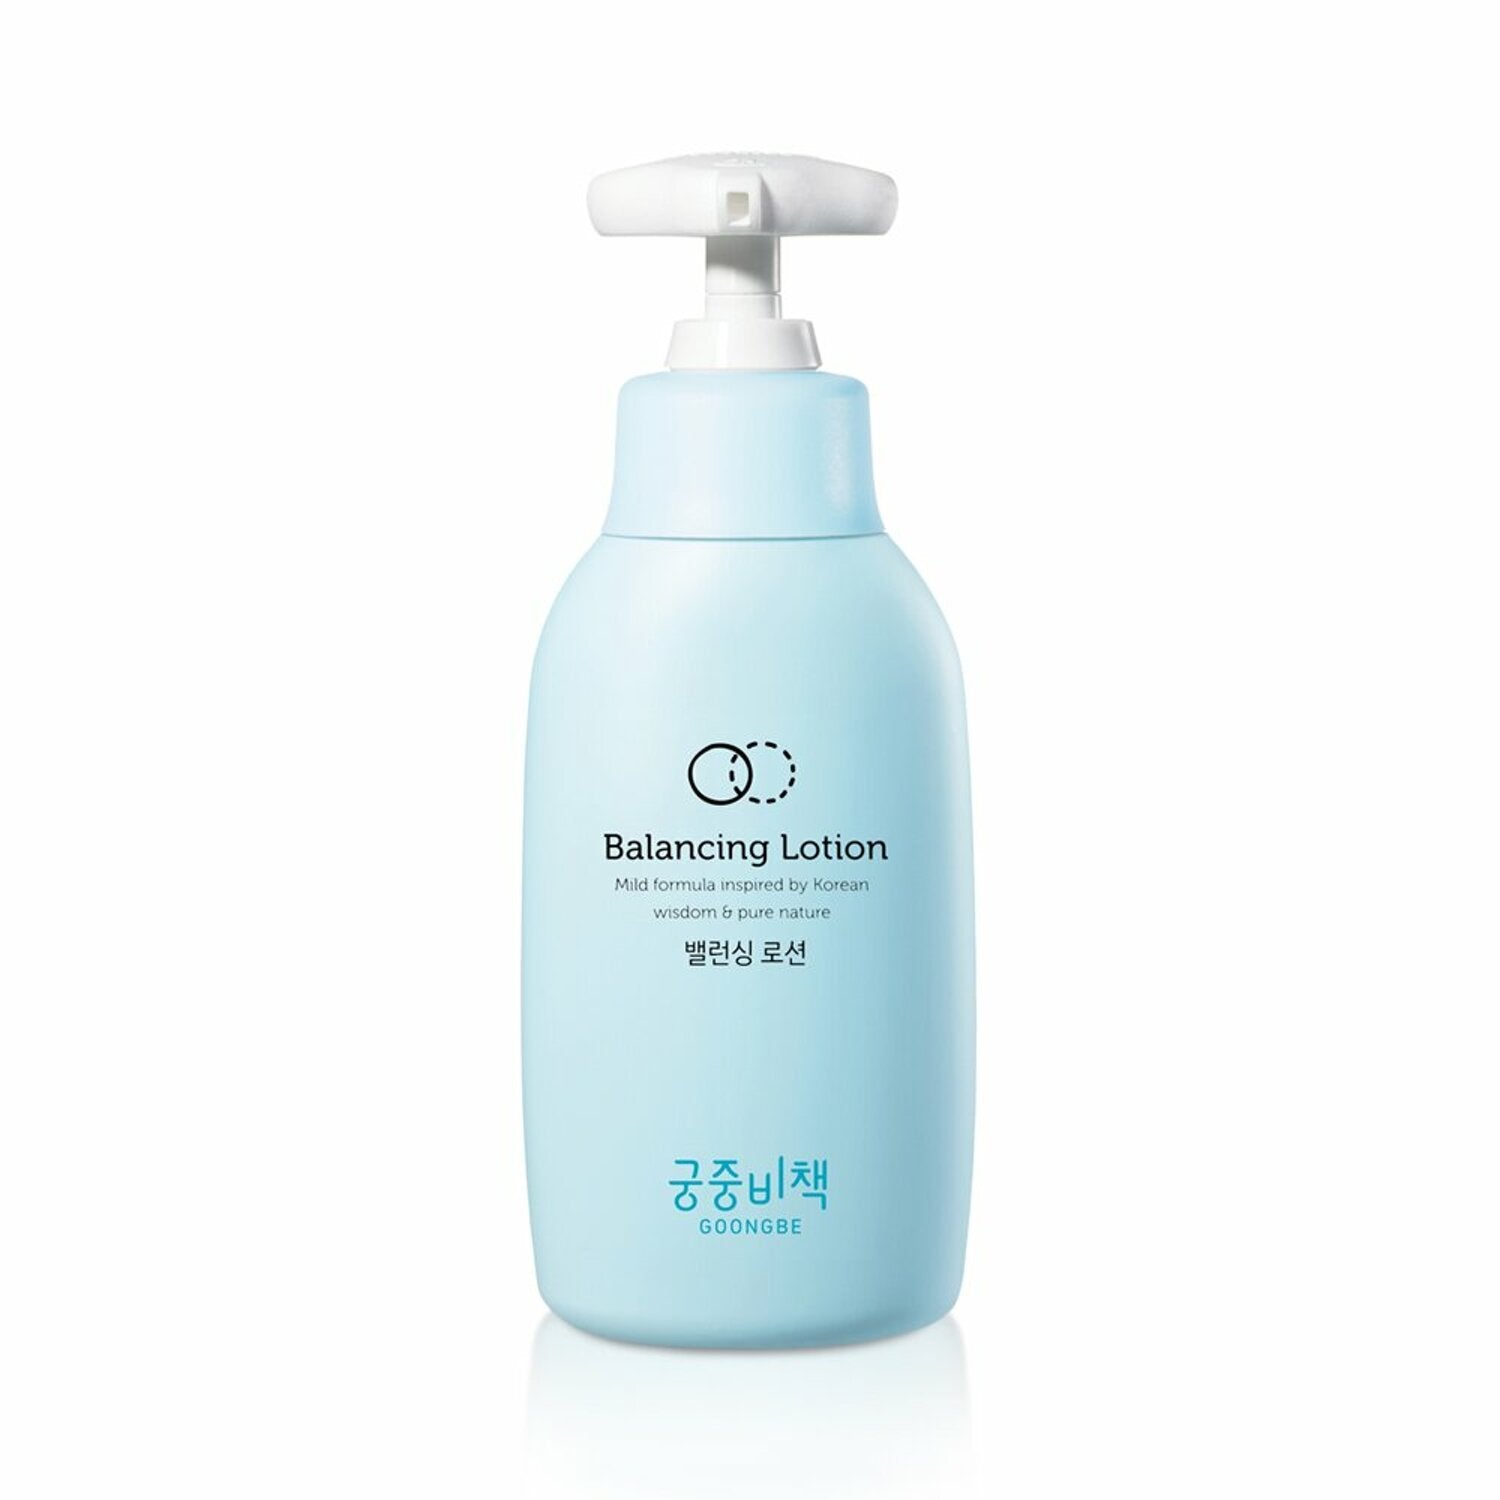 250ml GOONGBE Balancing Lotion for Kids, designed to provide gentle care for children's skin.